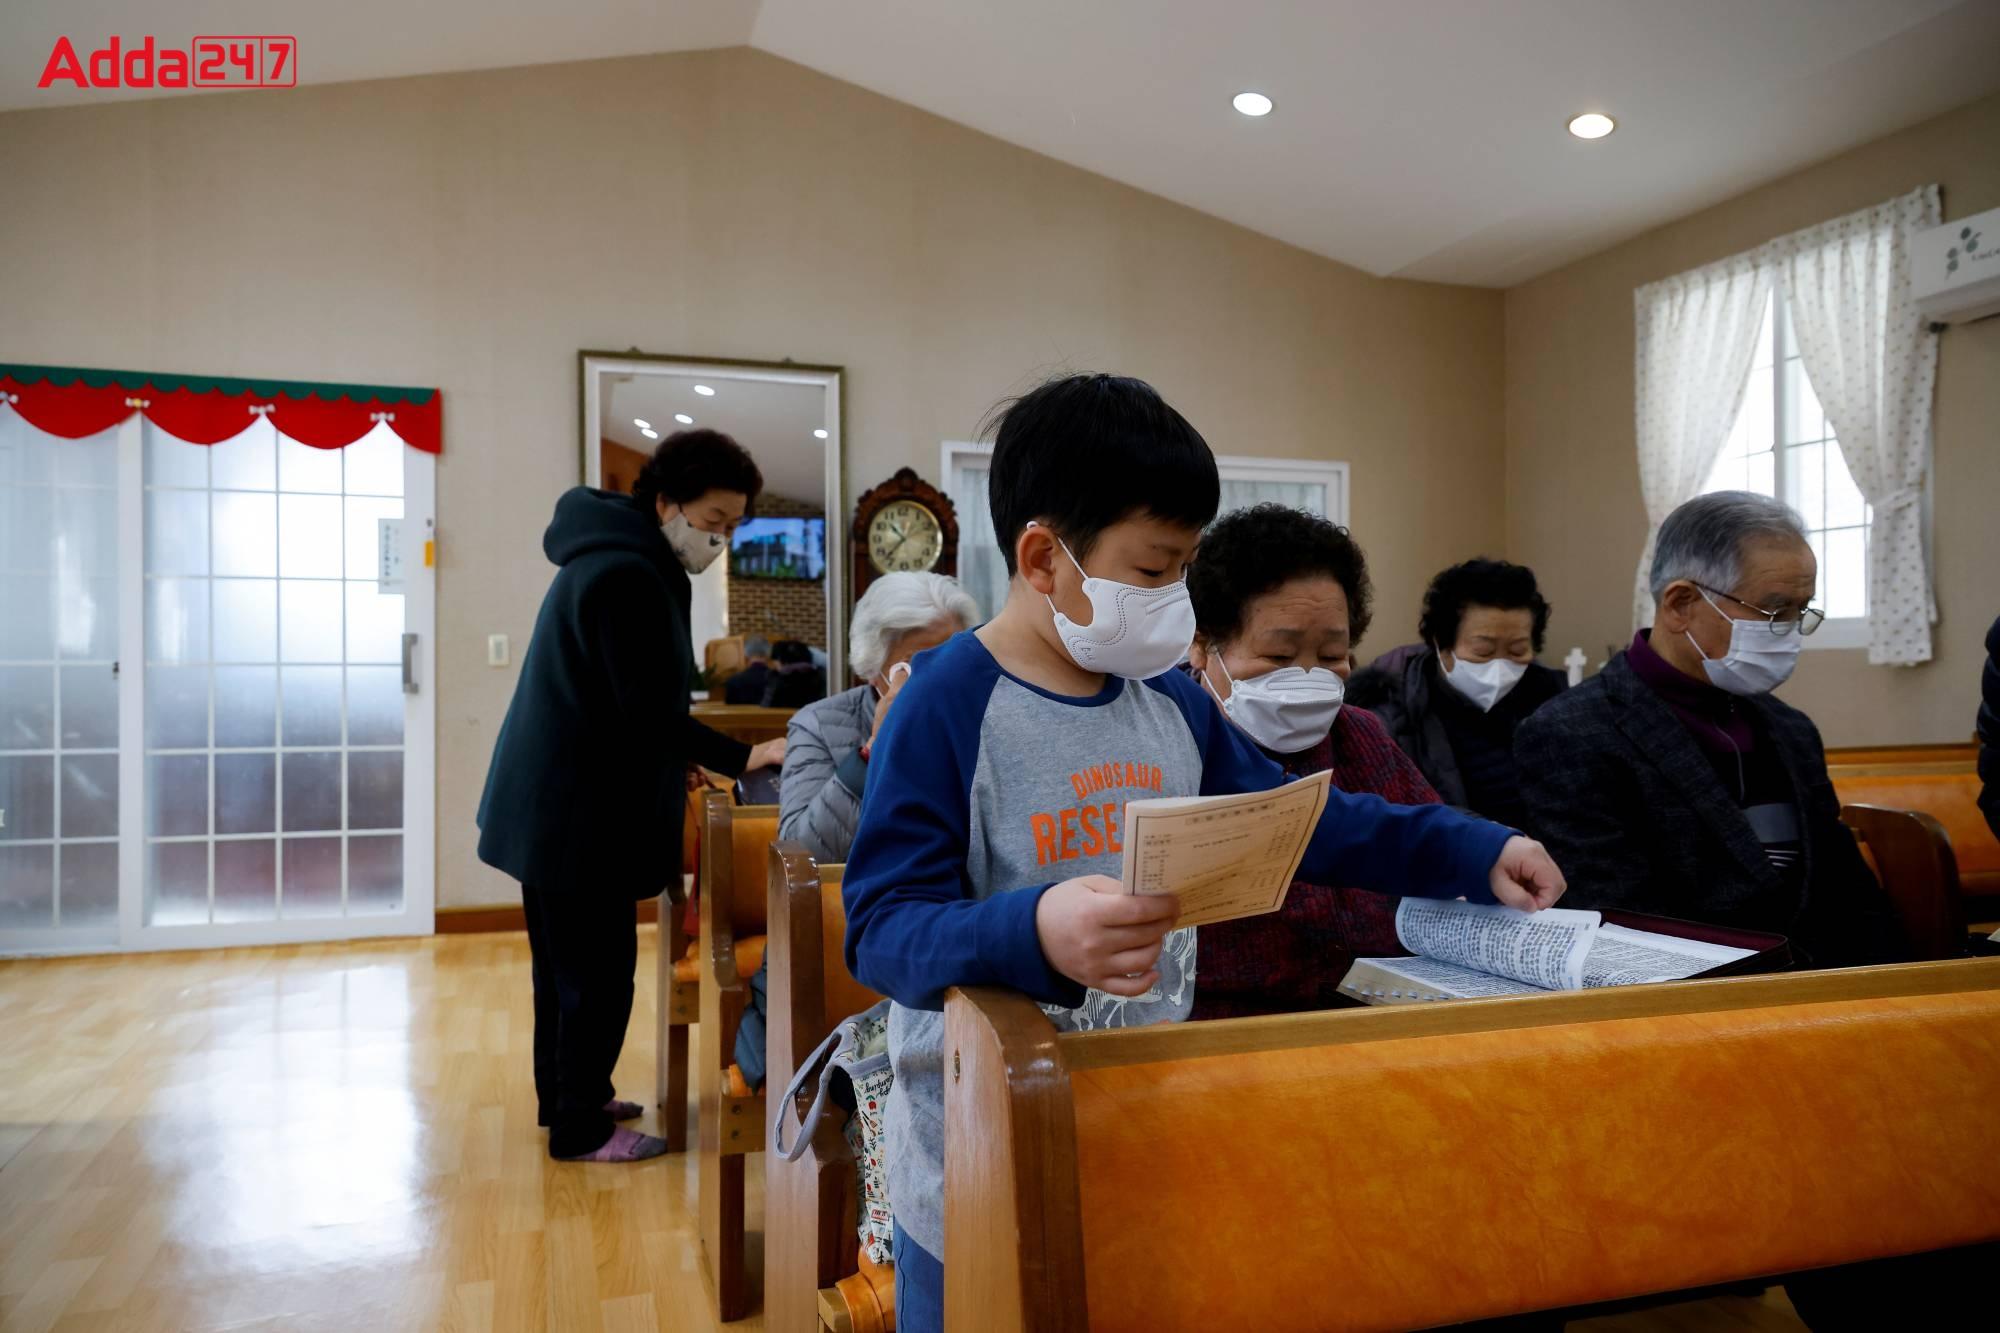 South Korea breaks its own record for the world’s lowest fertility rate